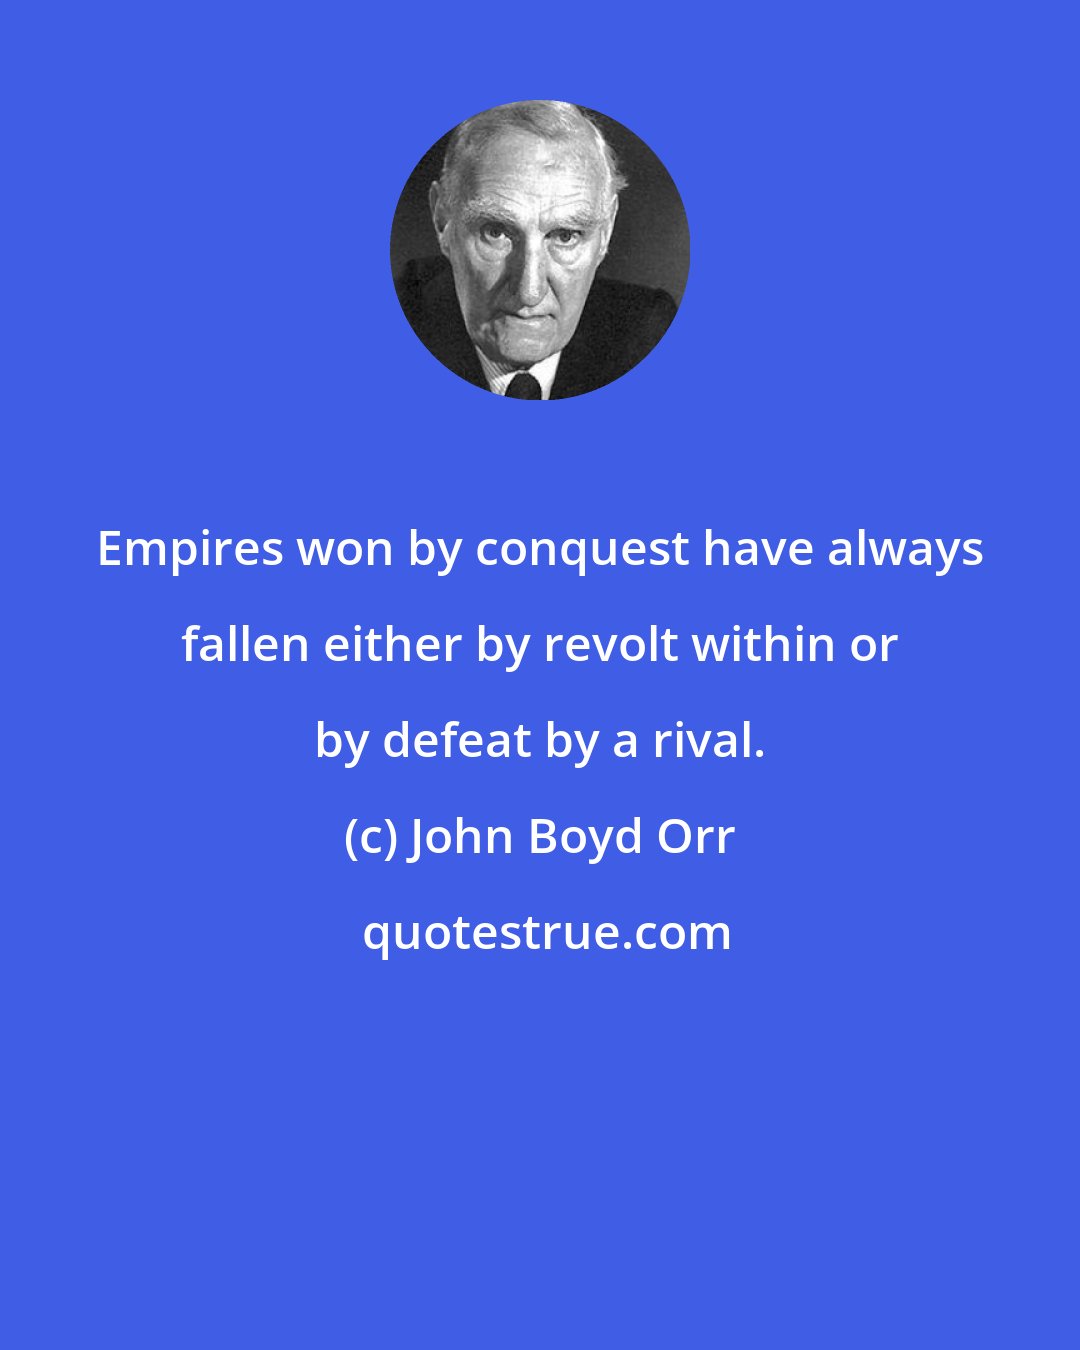 John Boyd Orr: Empires won by conquest have always fallen either by revolt within or by defeat by a rival.